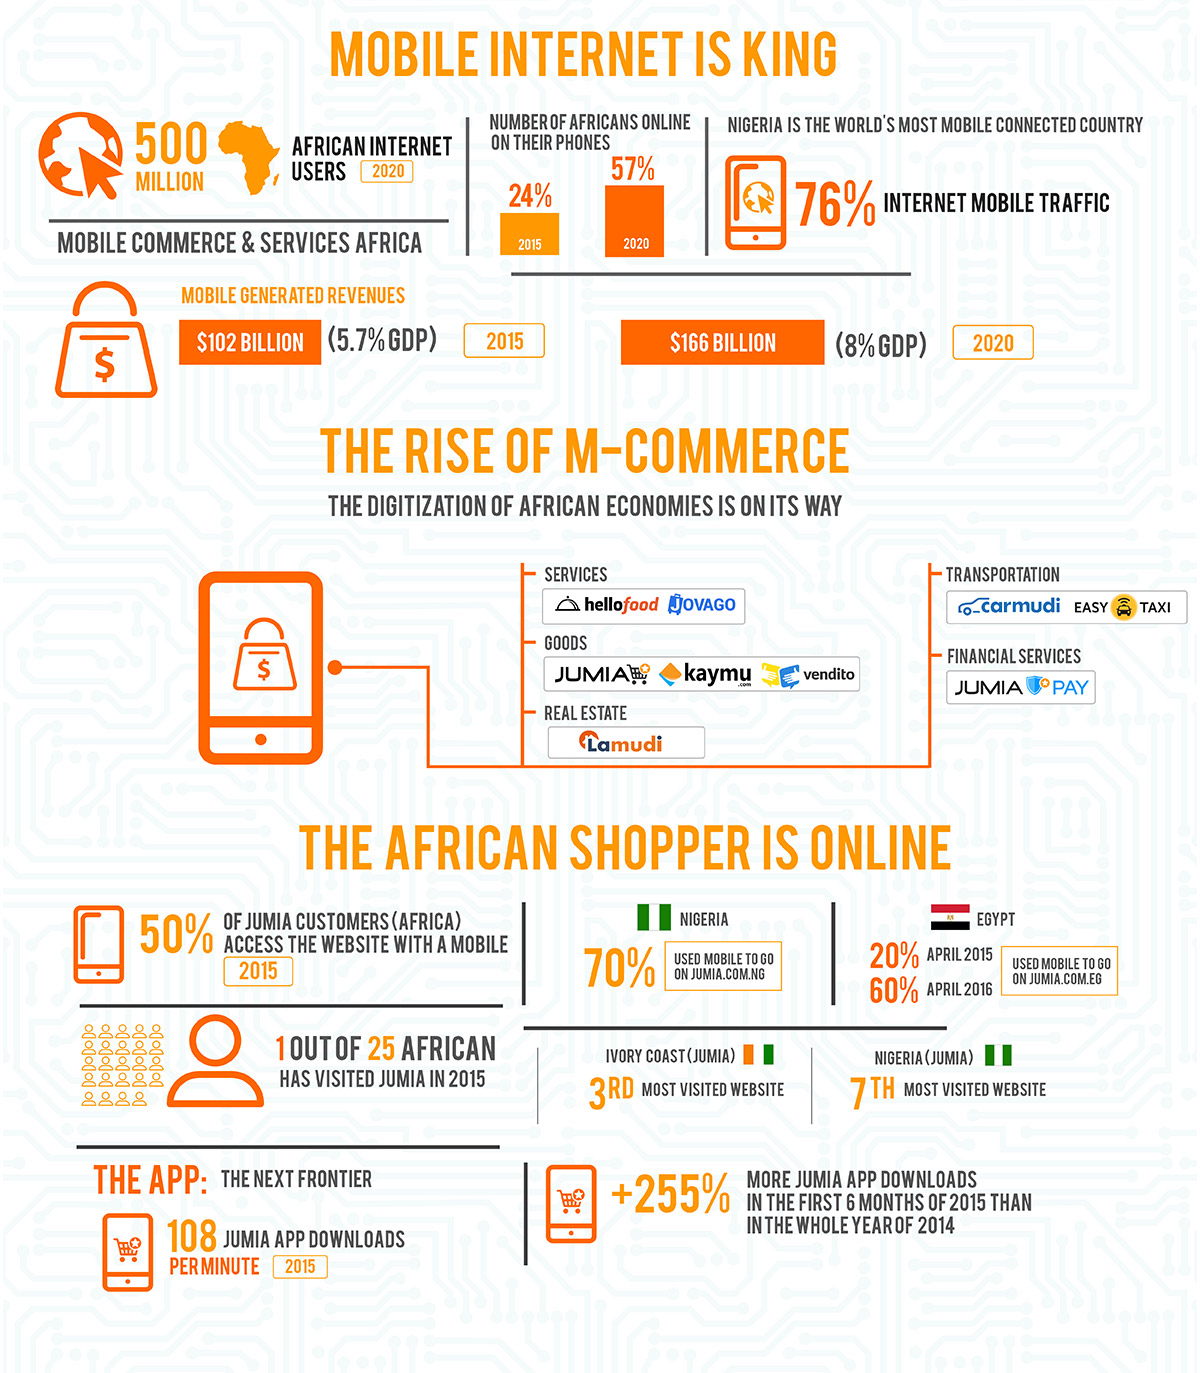 African Mobile Trends 2016